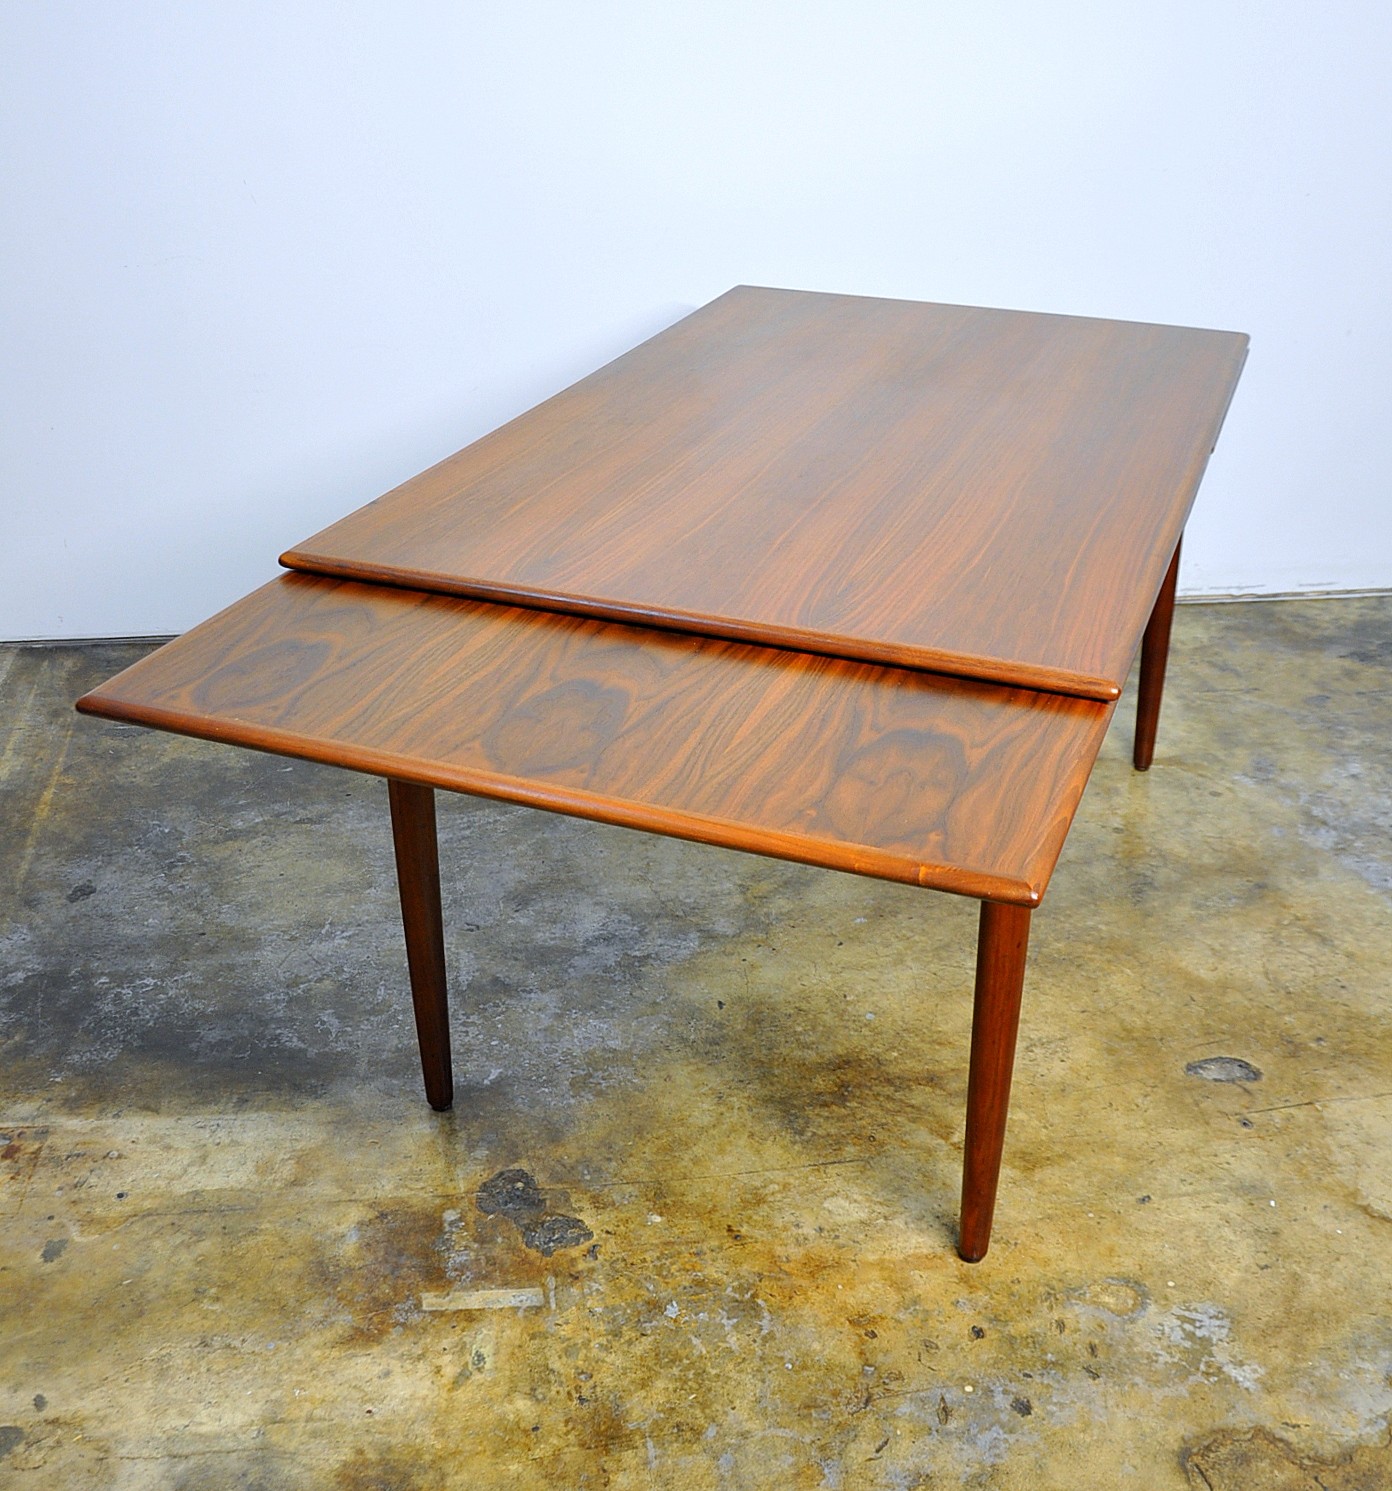 Modern Teak Dining Table: A Blend Of Style And Durability